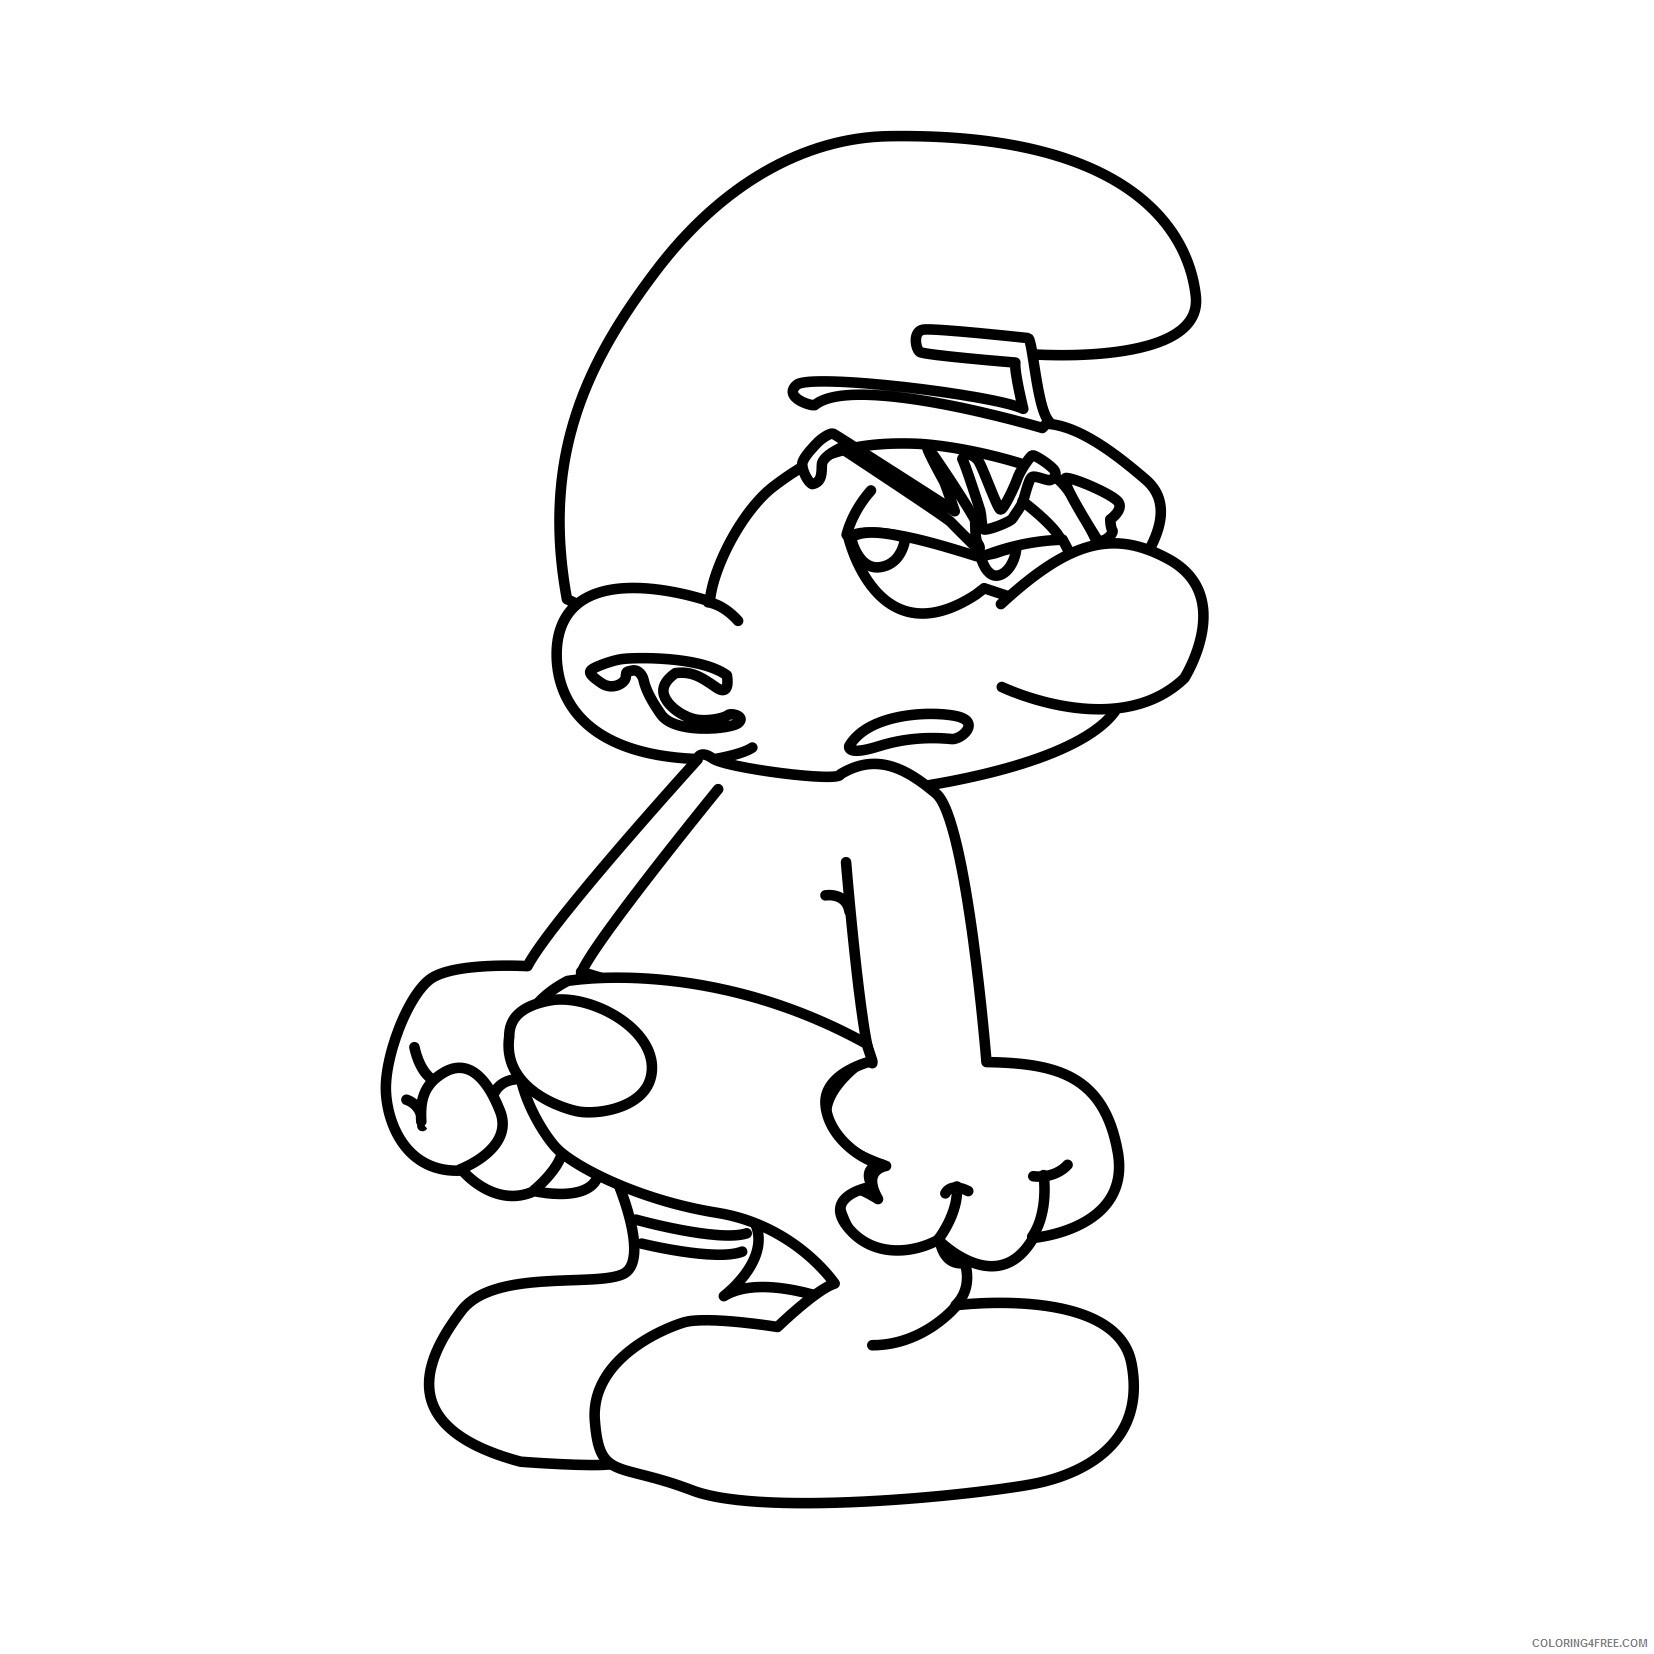 The Smurfs Coloring Pages TV Film Smurfs Printable 2020 09751 Coloring4free